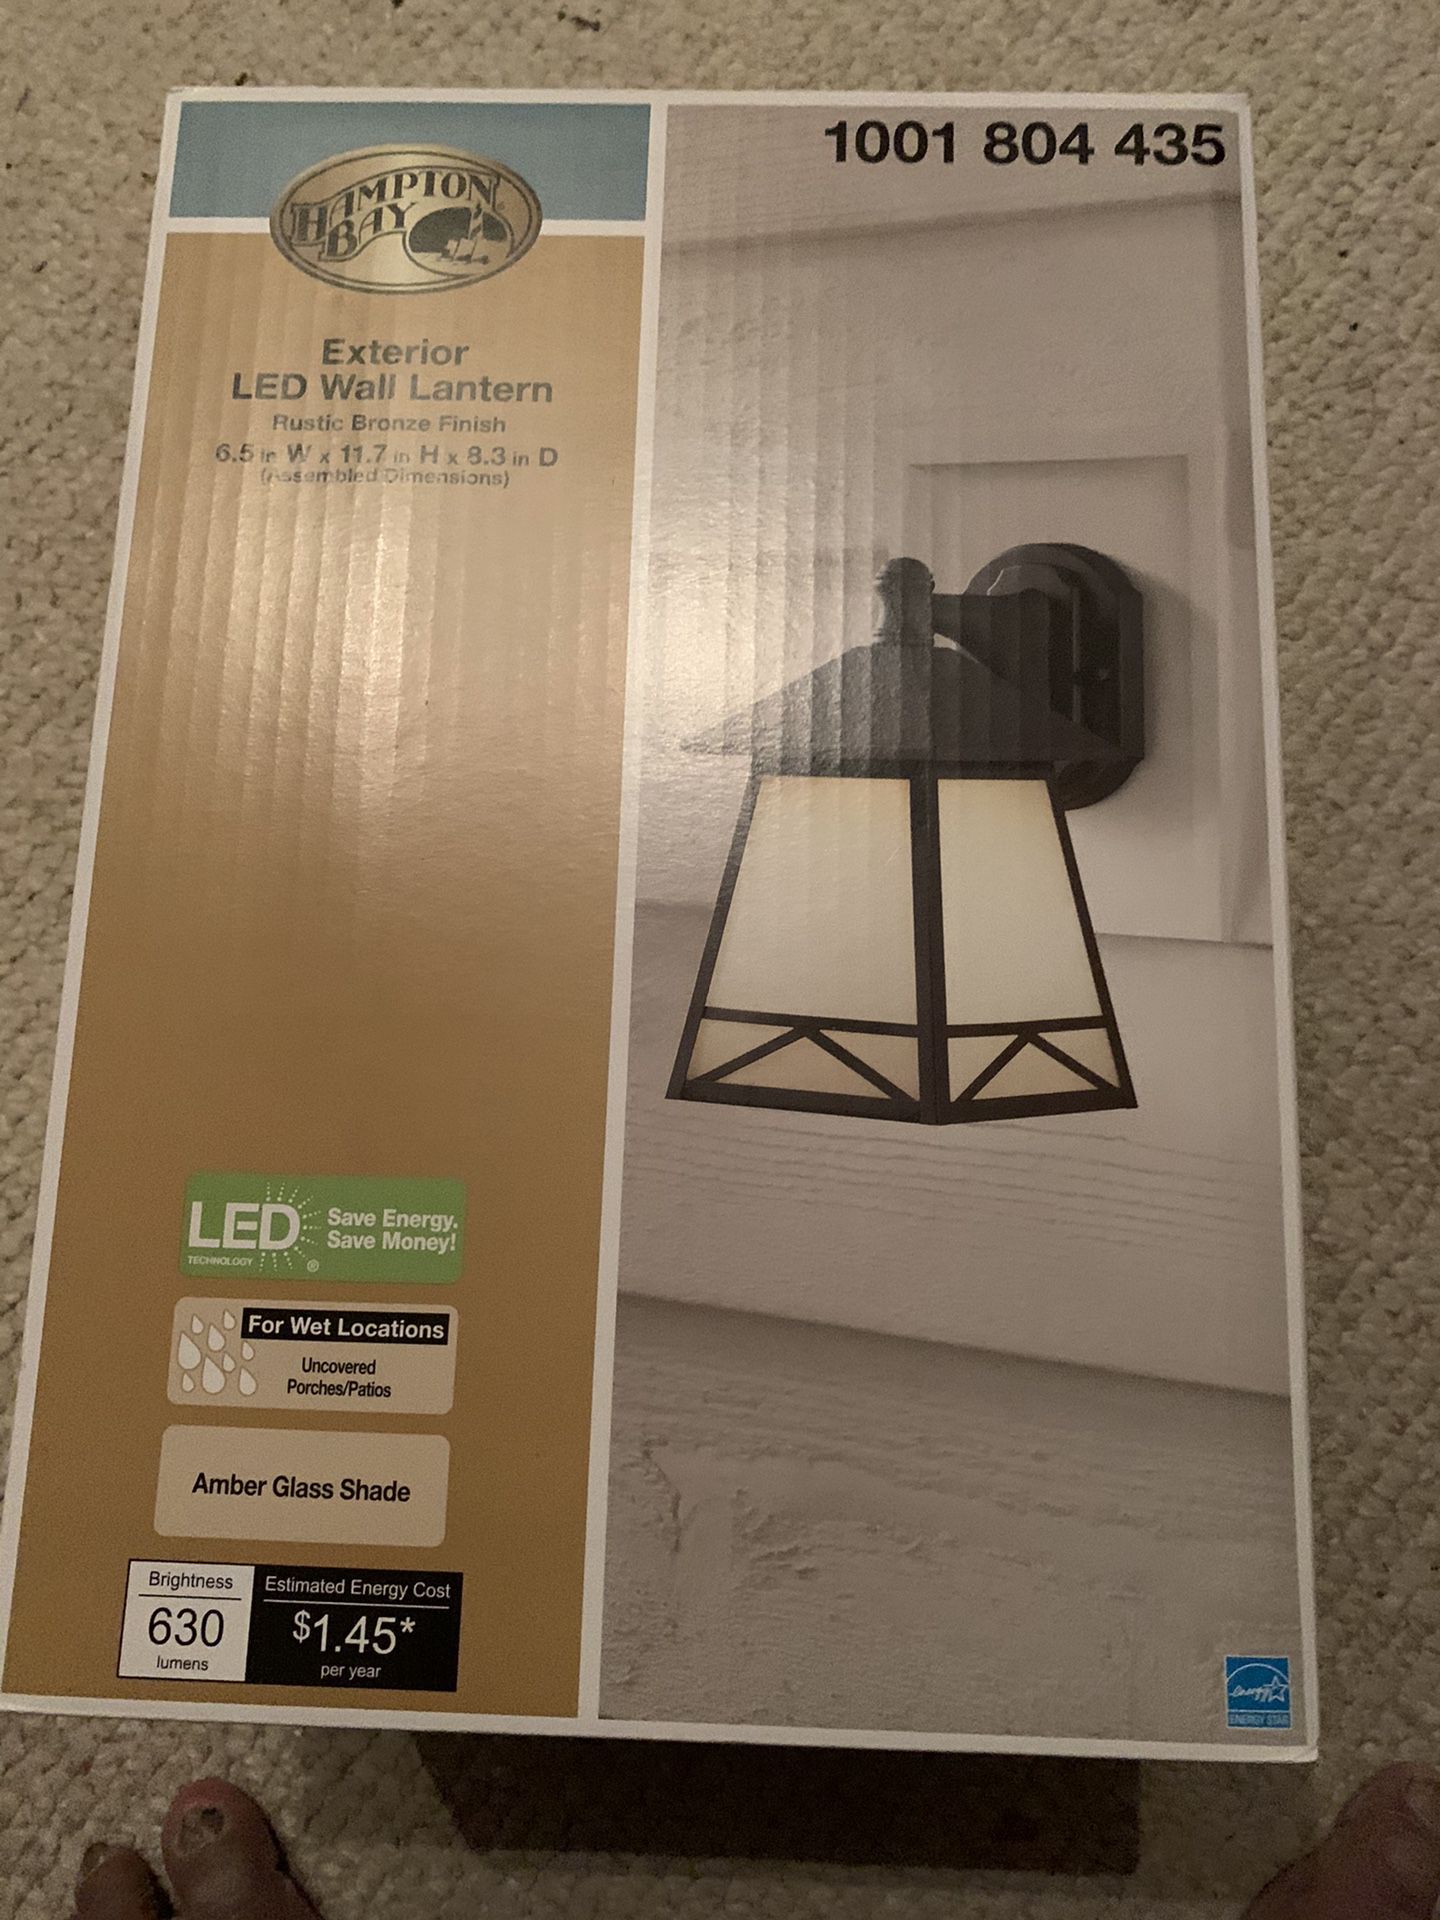 Price Reduced - Brand New 6.5” W x 11.7” H x 8.3” D Hampton Bay Exterior LED Wall Lantern with Amber Glass Shade